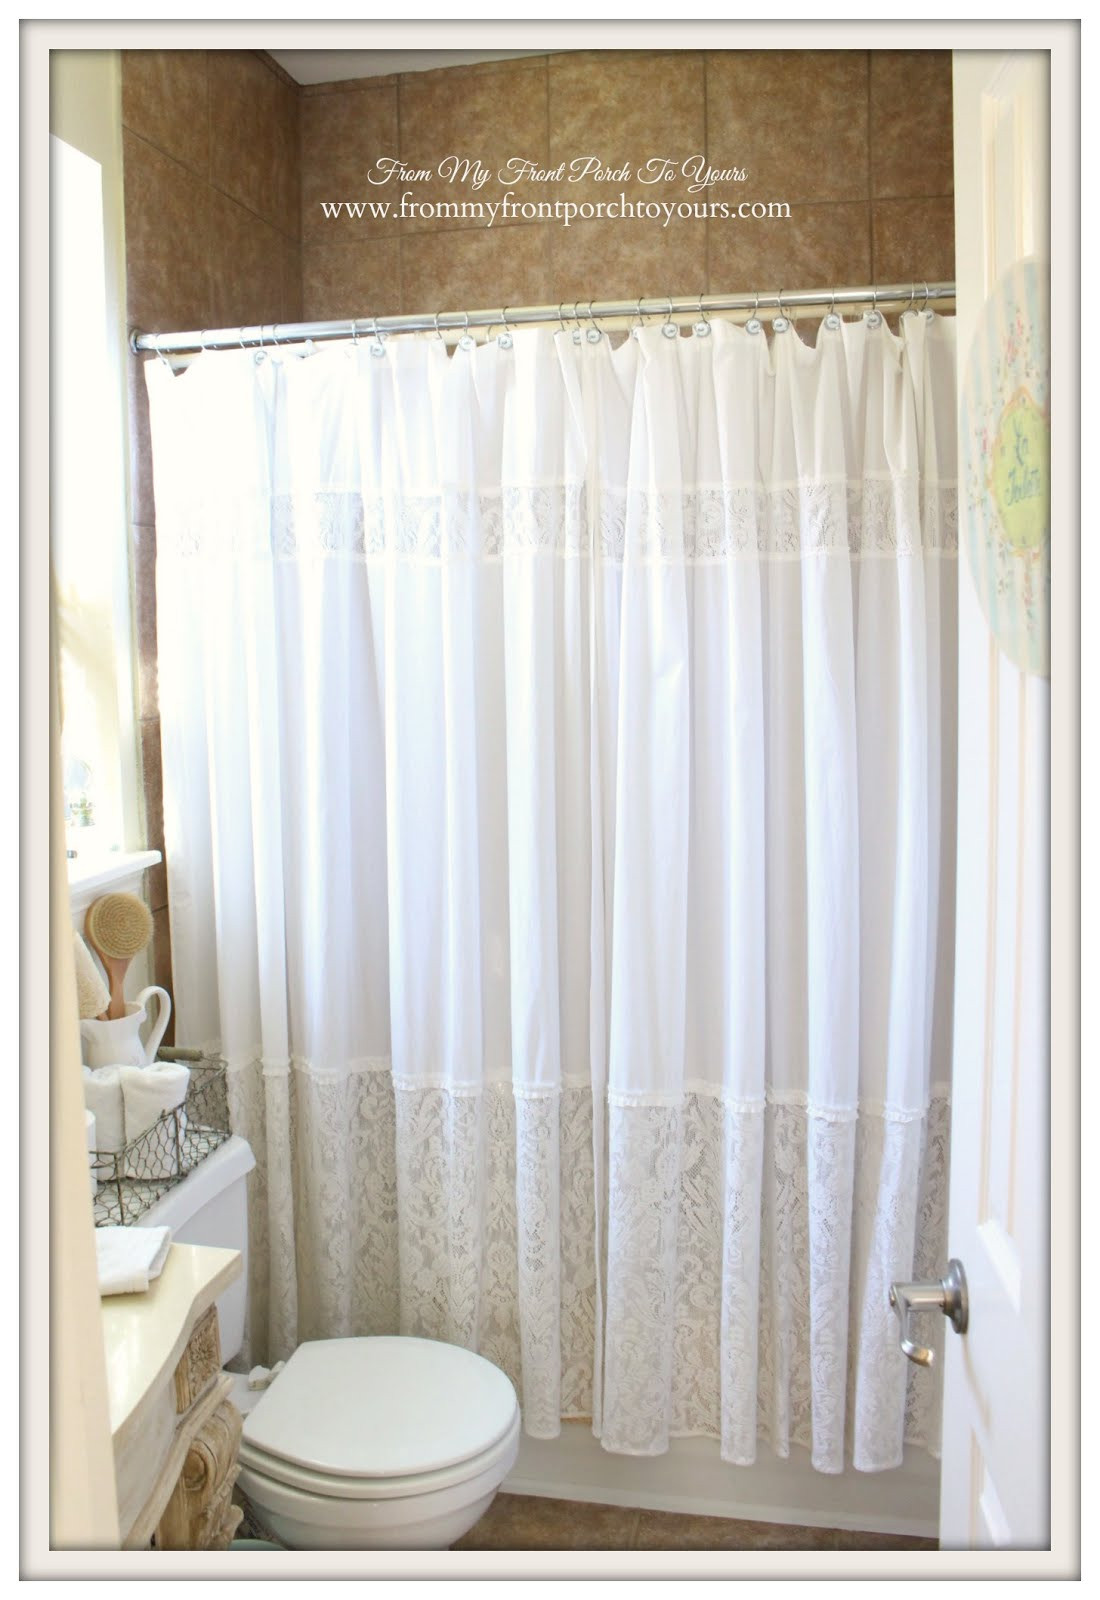 Farmhouse Bathroom Shower Curtain
 From My Front Porch To Yours Farmhouse Guest Bathroom